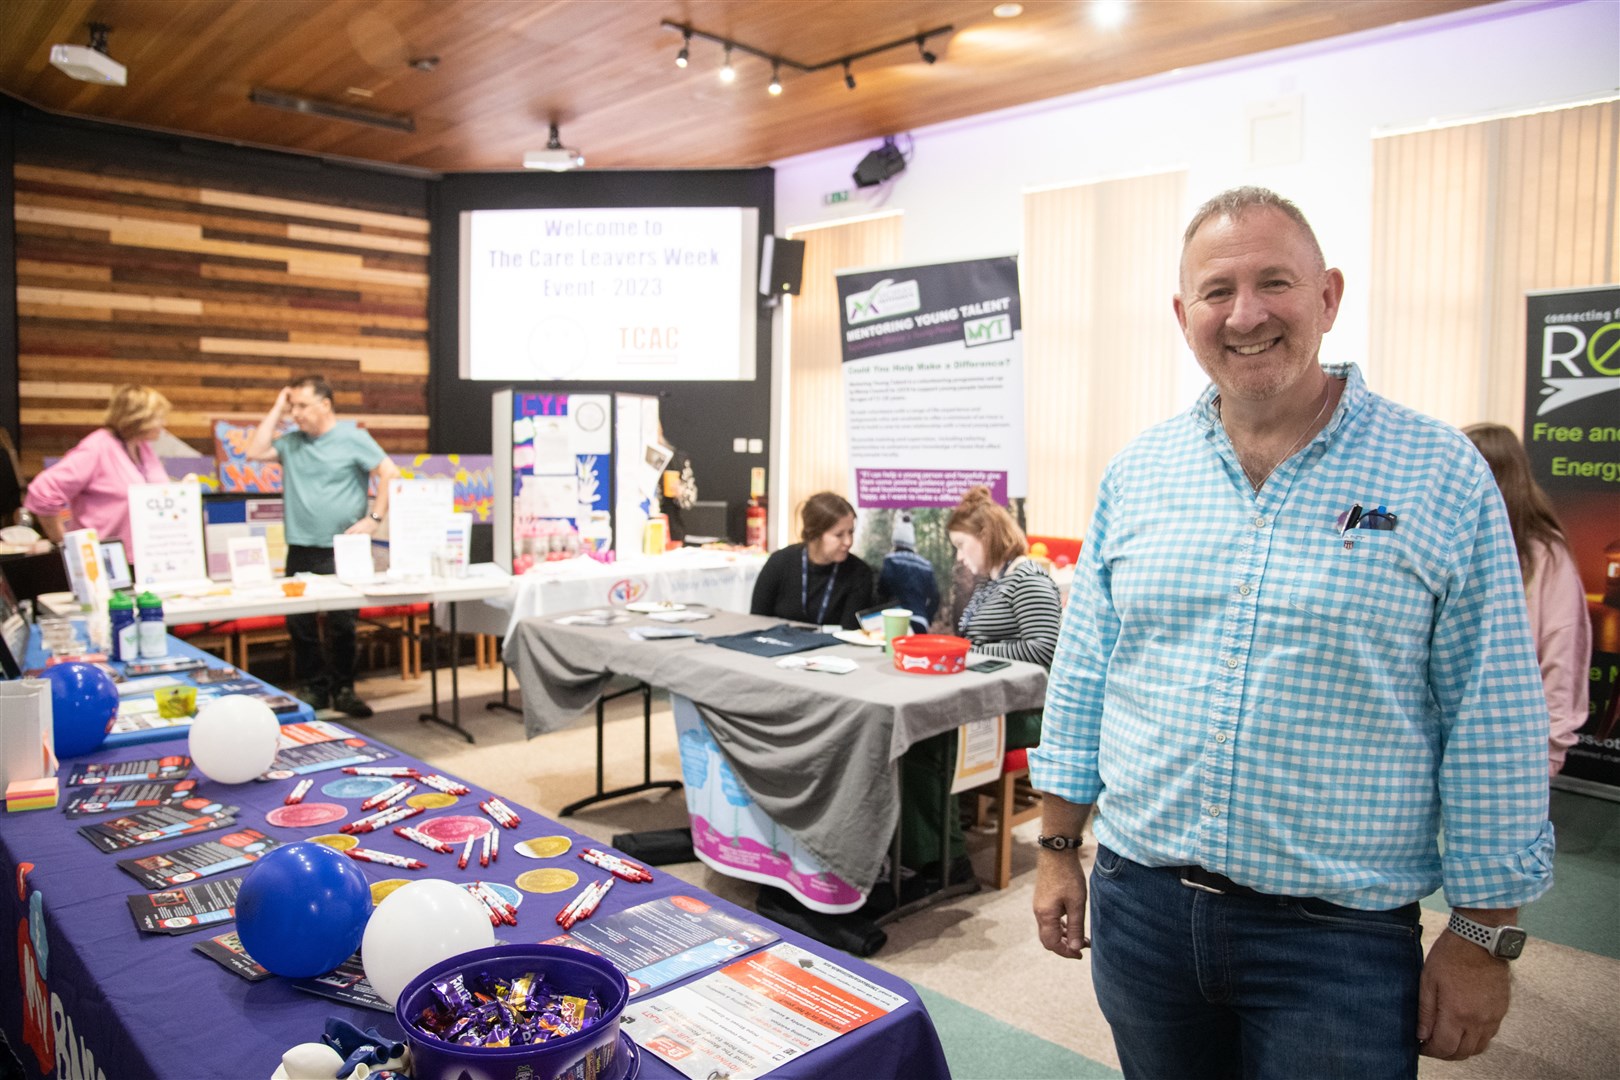 Alistair Davidson, Promise Engagement Officer, Moray Council...As part of Carer's Week, the Moray Champion's Board hold a drop in session for care leavers and those in care...Picture: Daniel Forsyth..